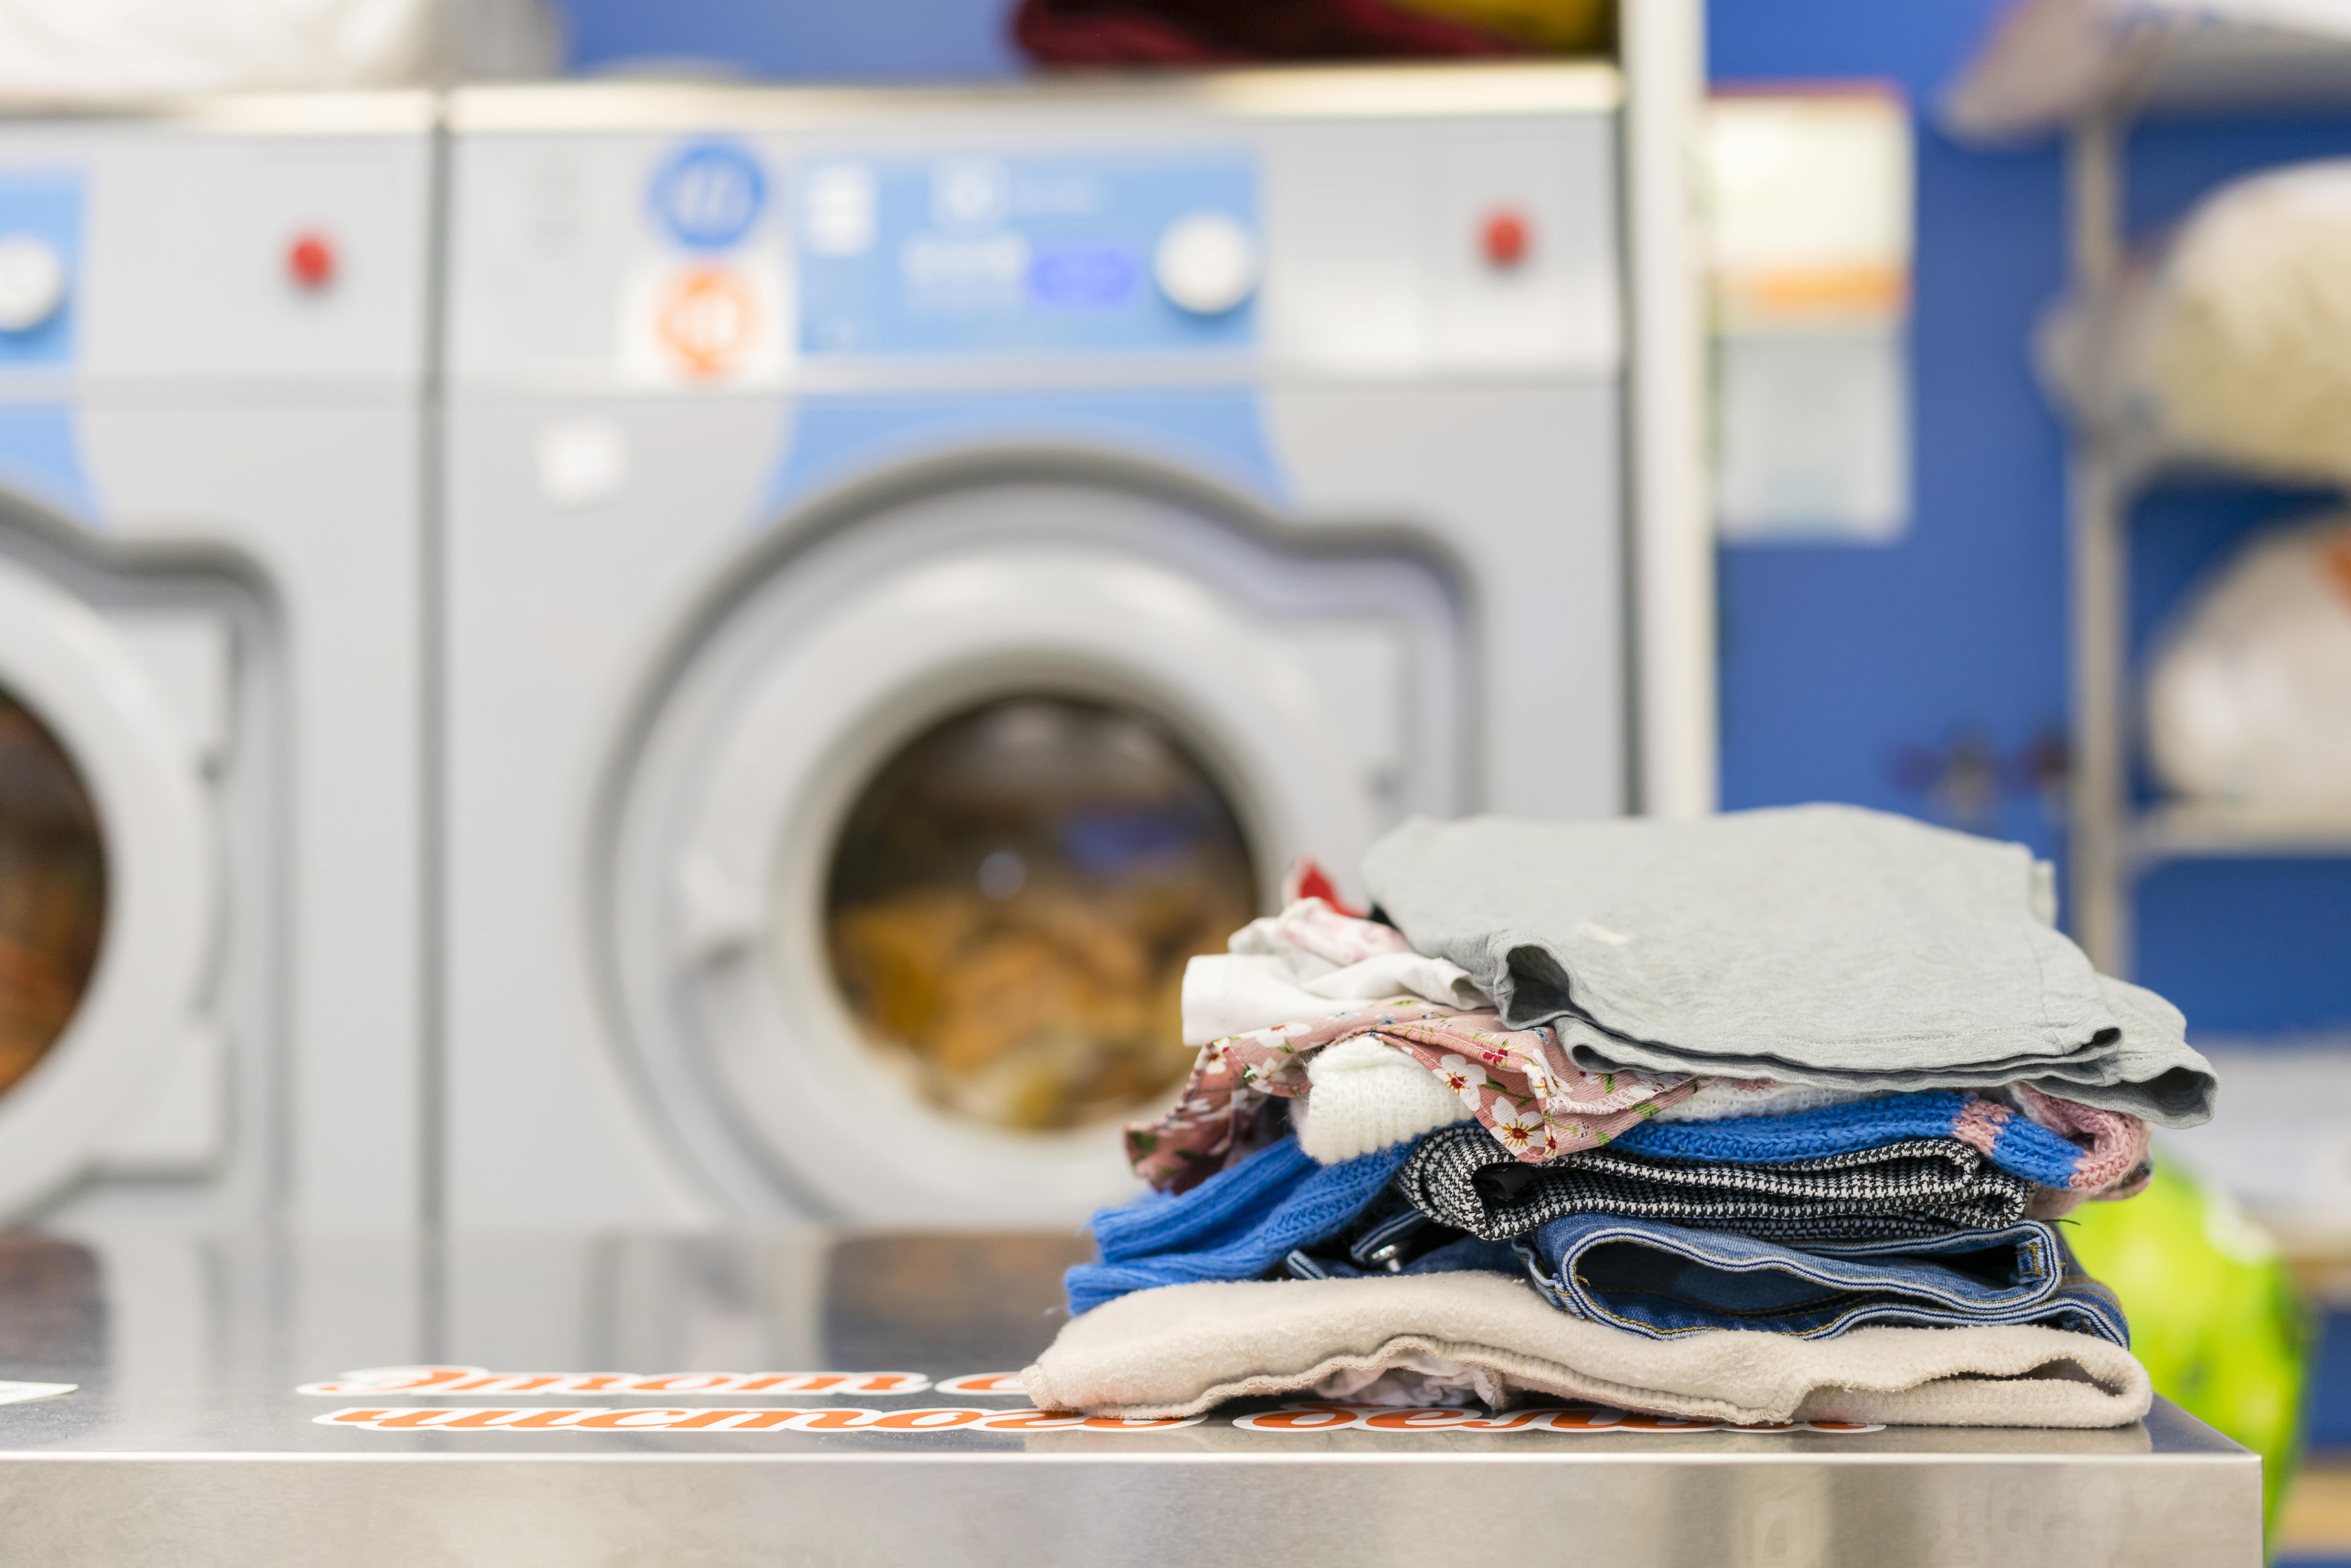 The Ultimate Guide to Buying a New Washing Machine